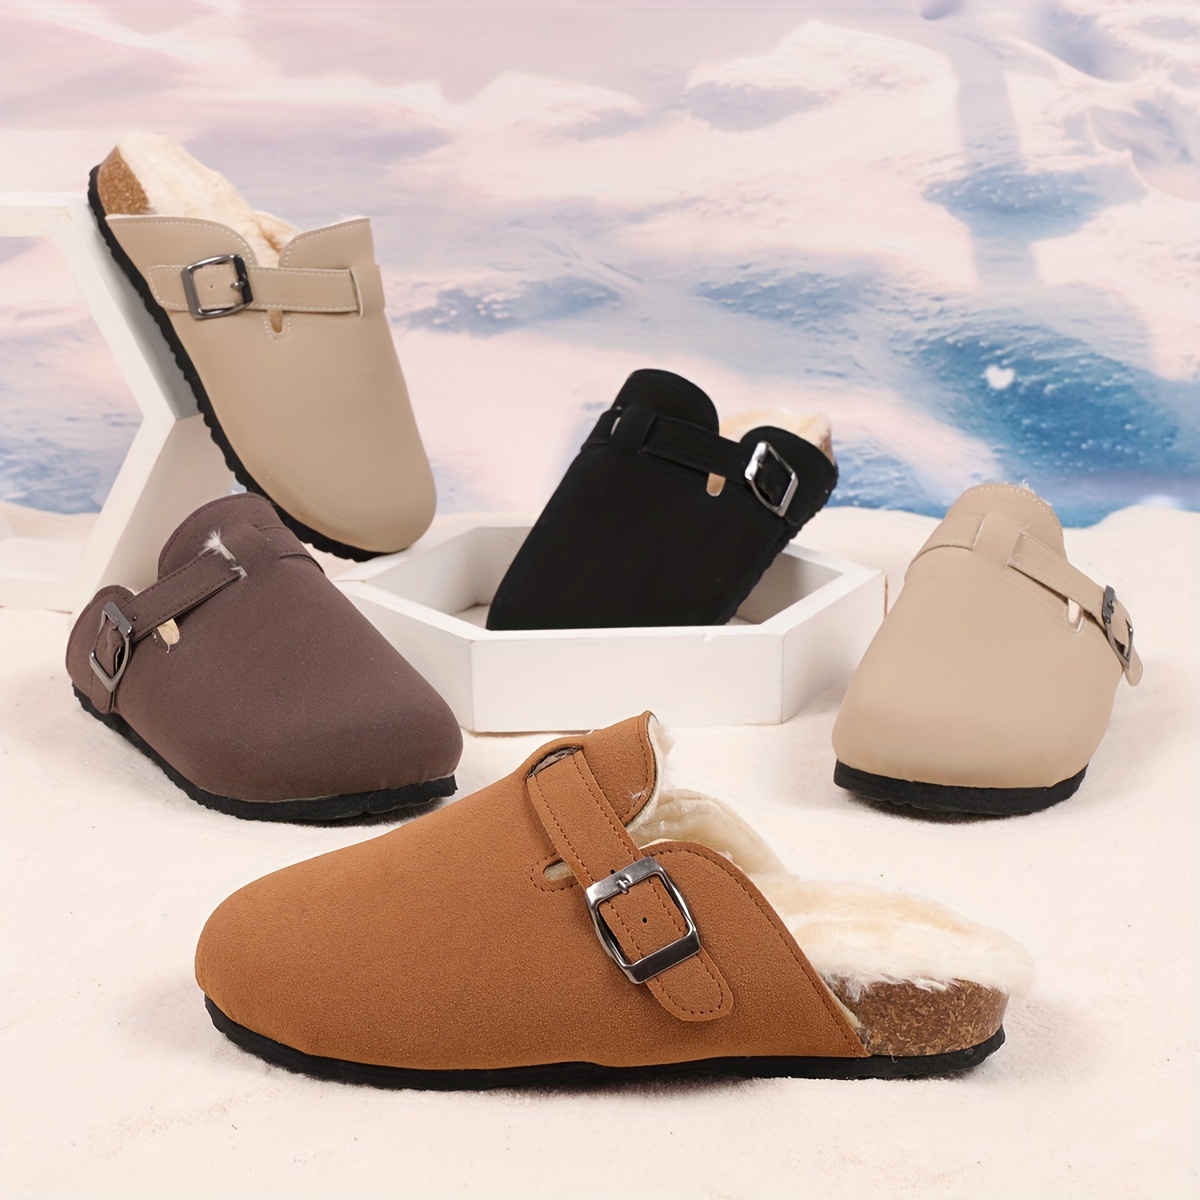 womens buckle strap detailed mules casual slip on plush lined shoes comfortable flat winter shoes details 0